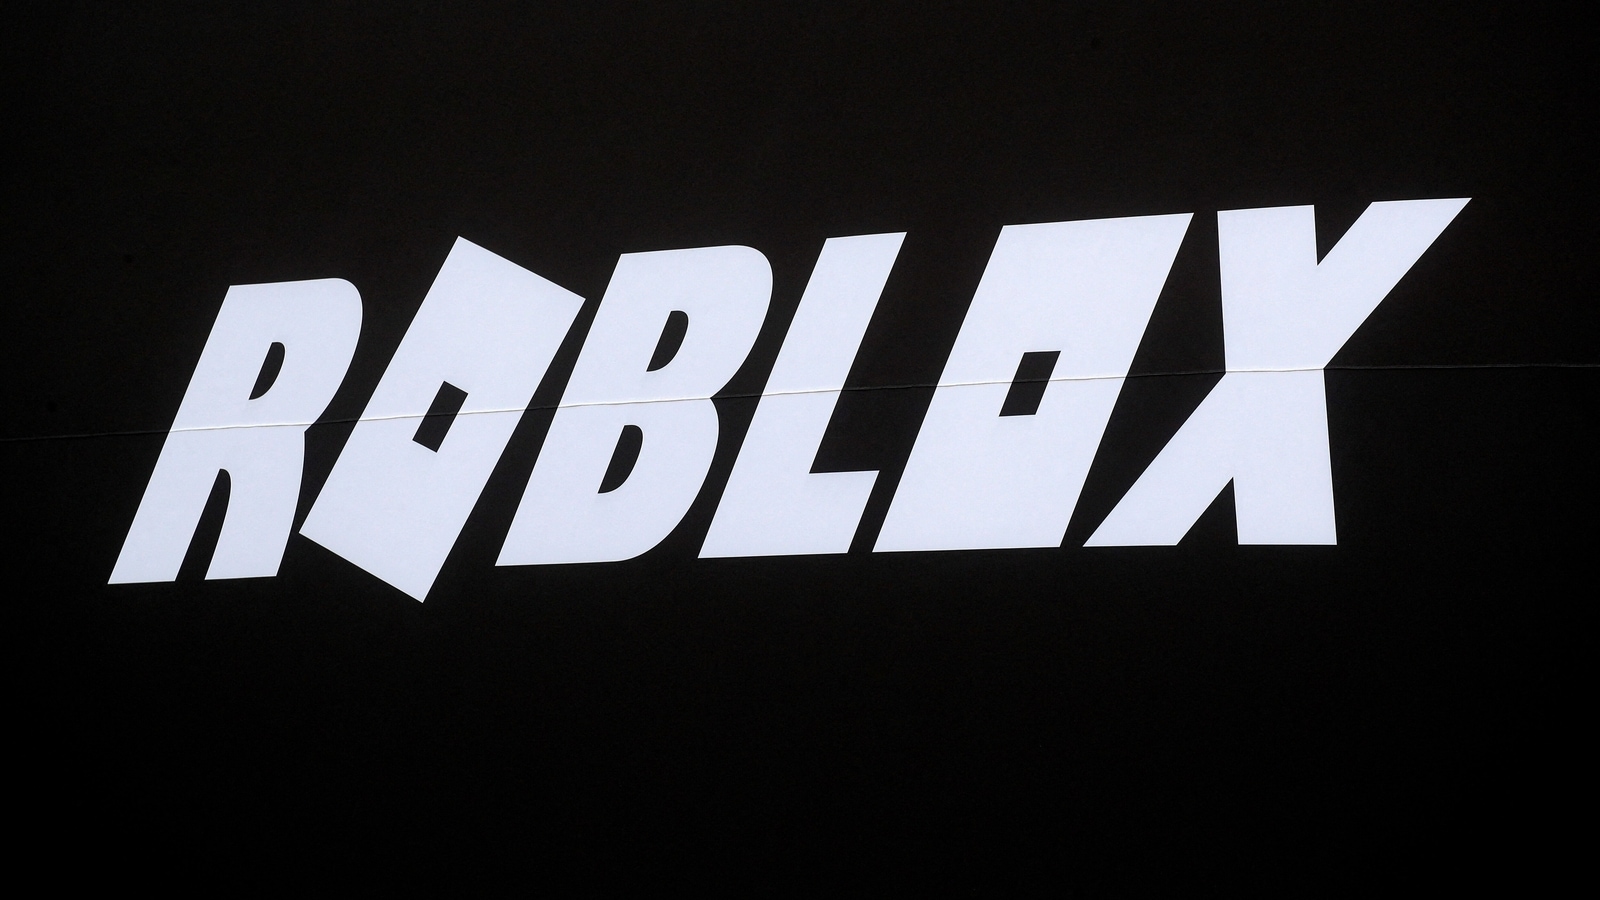 Roblox Is Now Worth More Than Ubisoft and Take-Two Combined: What